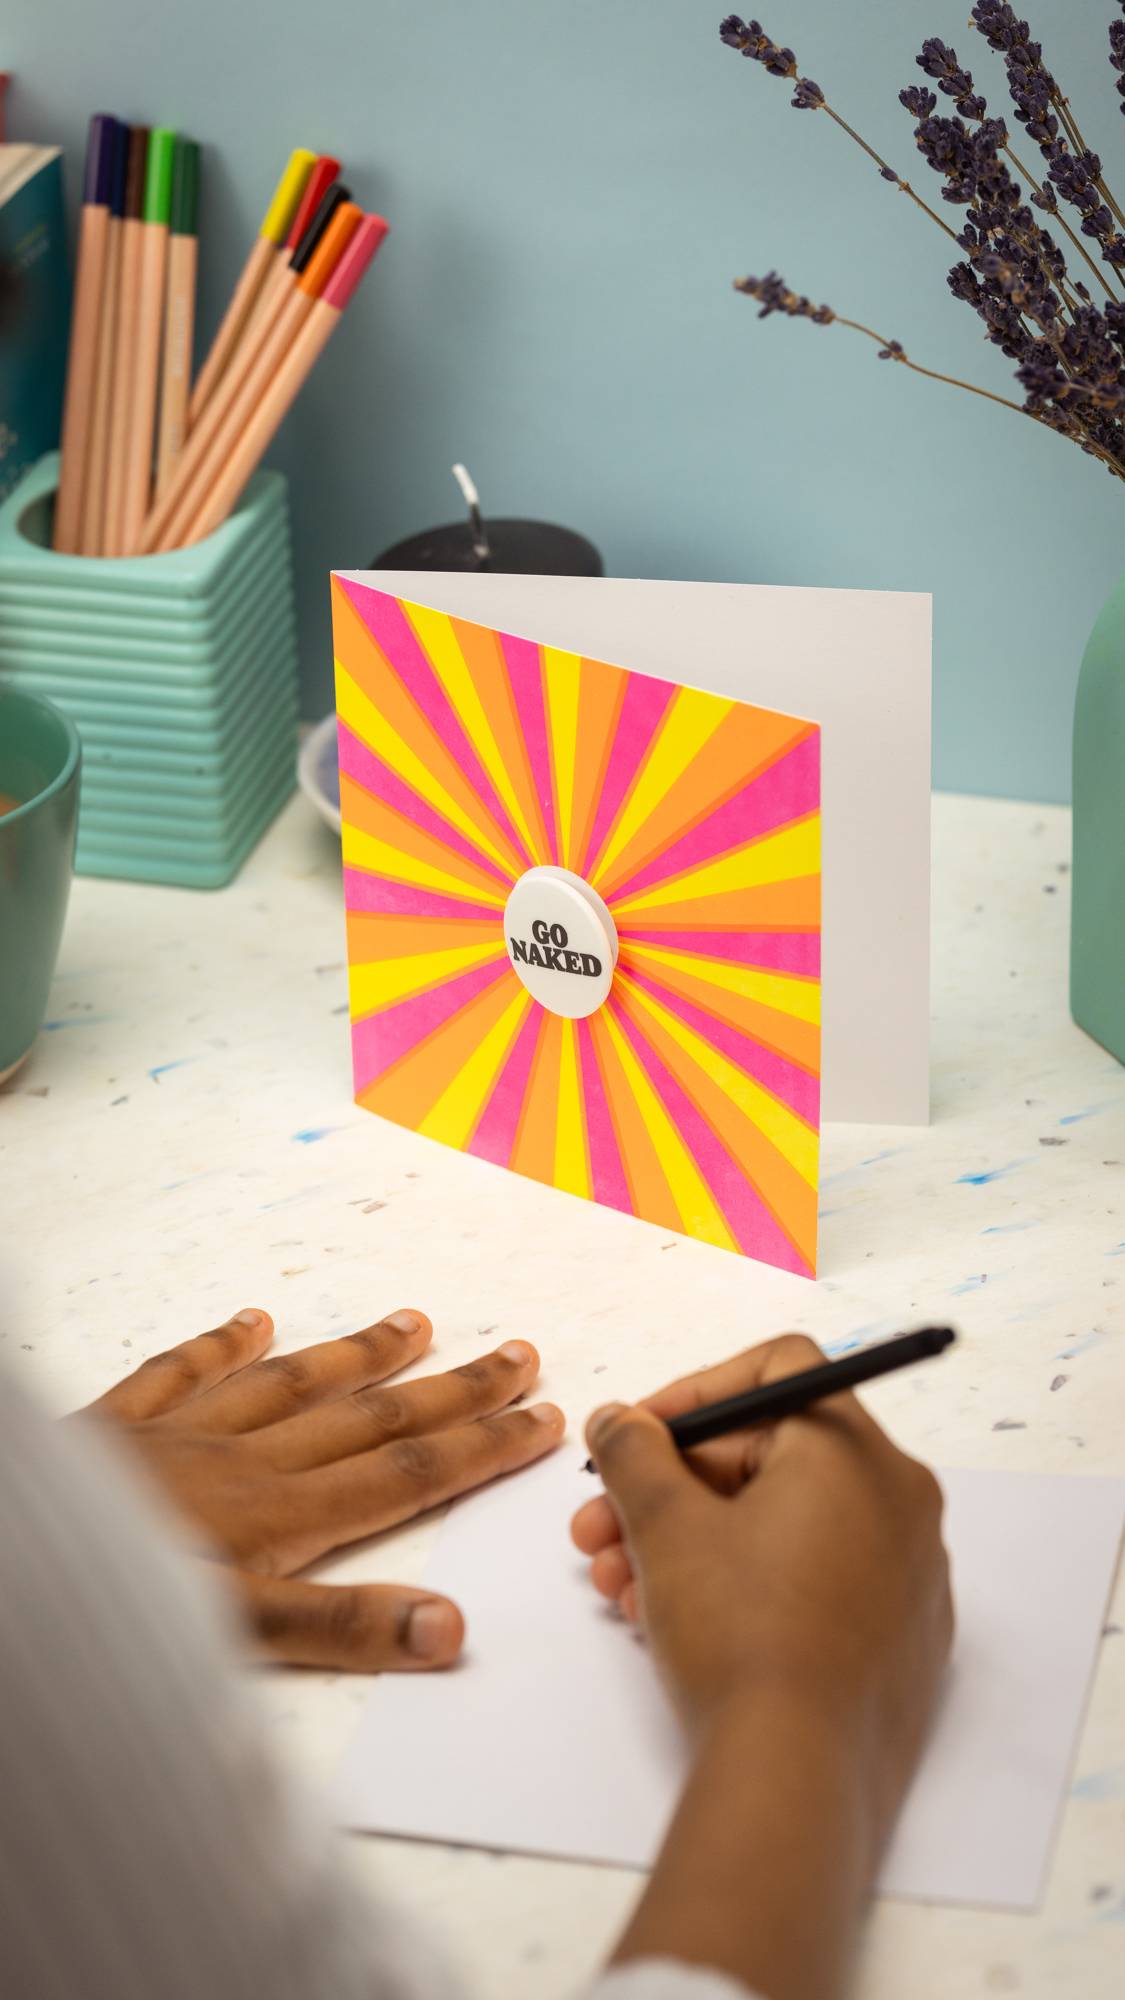 The colourful "Go Naked" card is stood up as the model writes the envelope on the table. The badge is still attached.